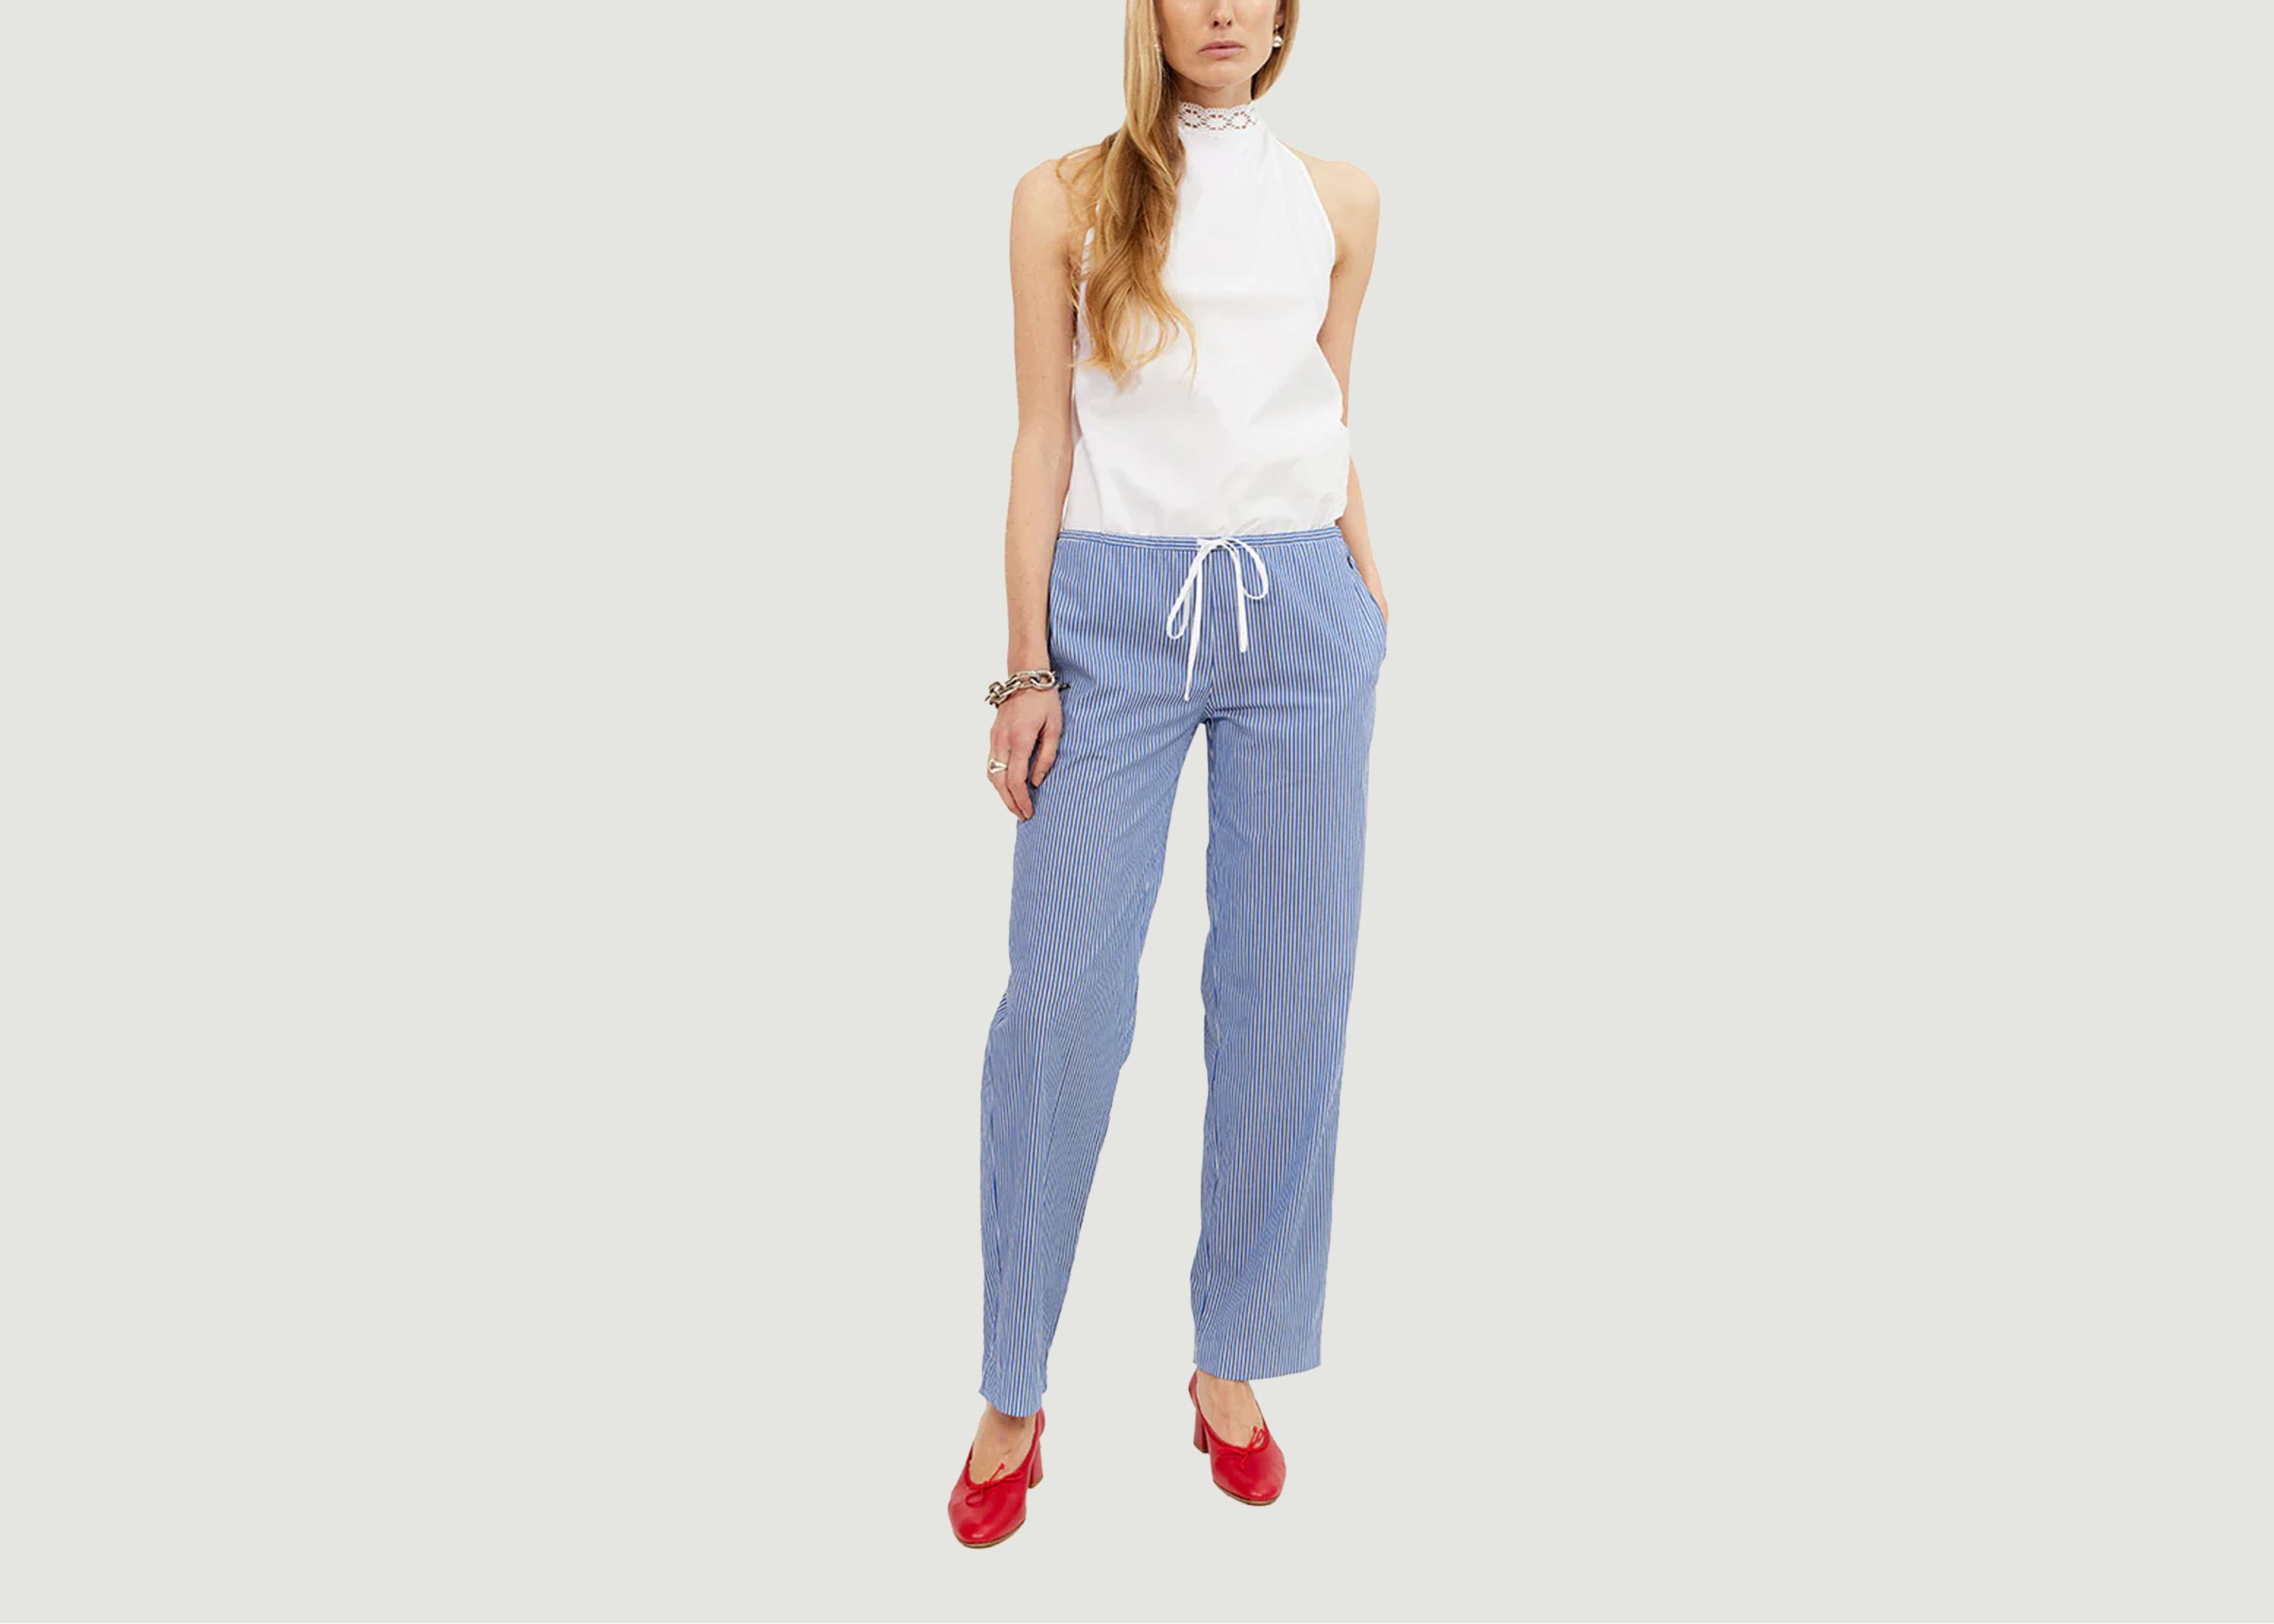 Mythical Embroidered Loose Pants - Musier